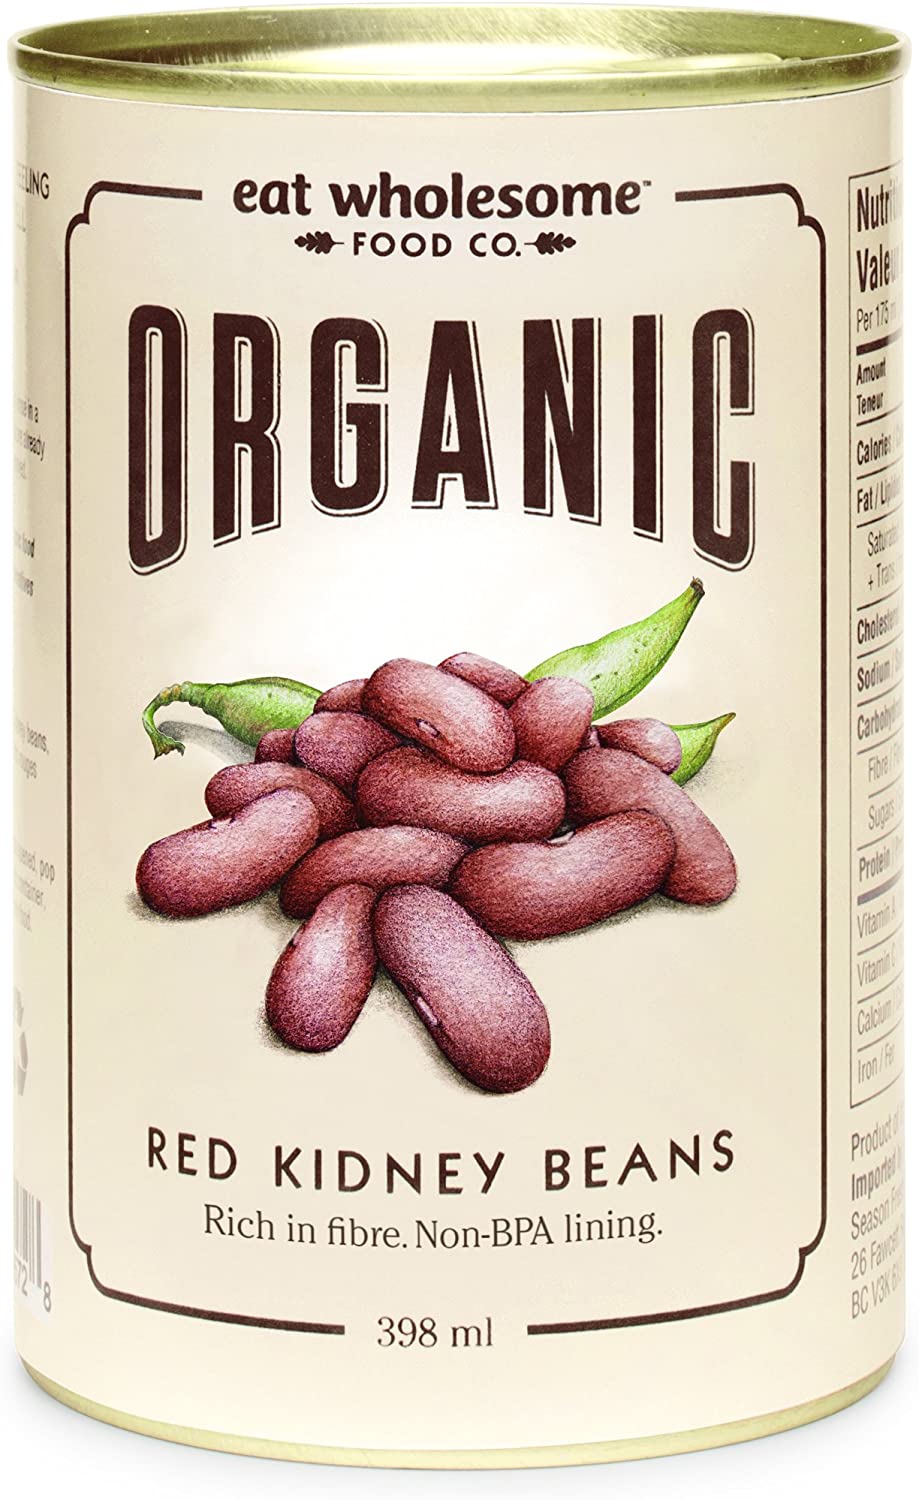 Eat Wholesome Food Co. Organic Red Kidney Beans 398ml